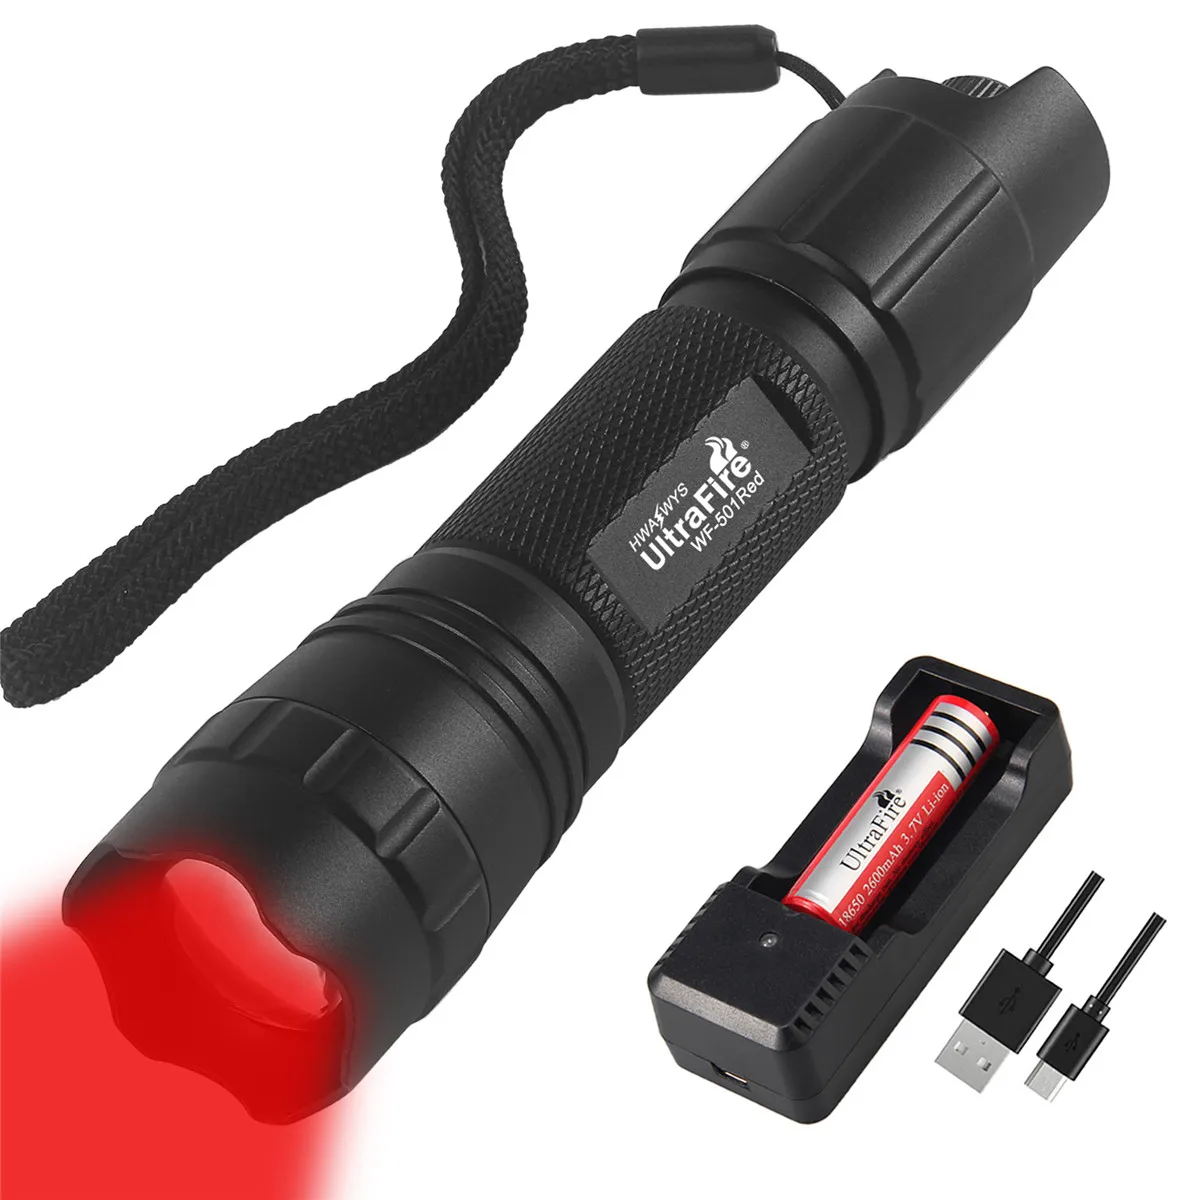 

UltraFire CF-501R Red Hunting Flashlight 1 Mode Infinite Dimming Tactical Torch Light Zoomable LED Lantern for Night Observation